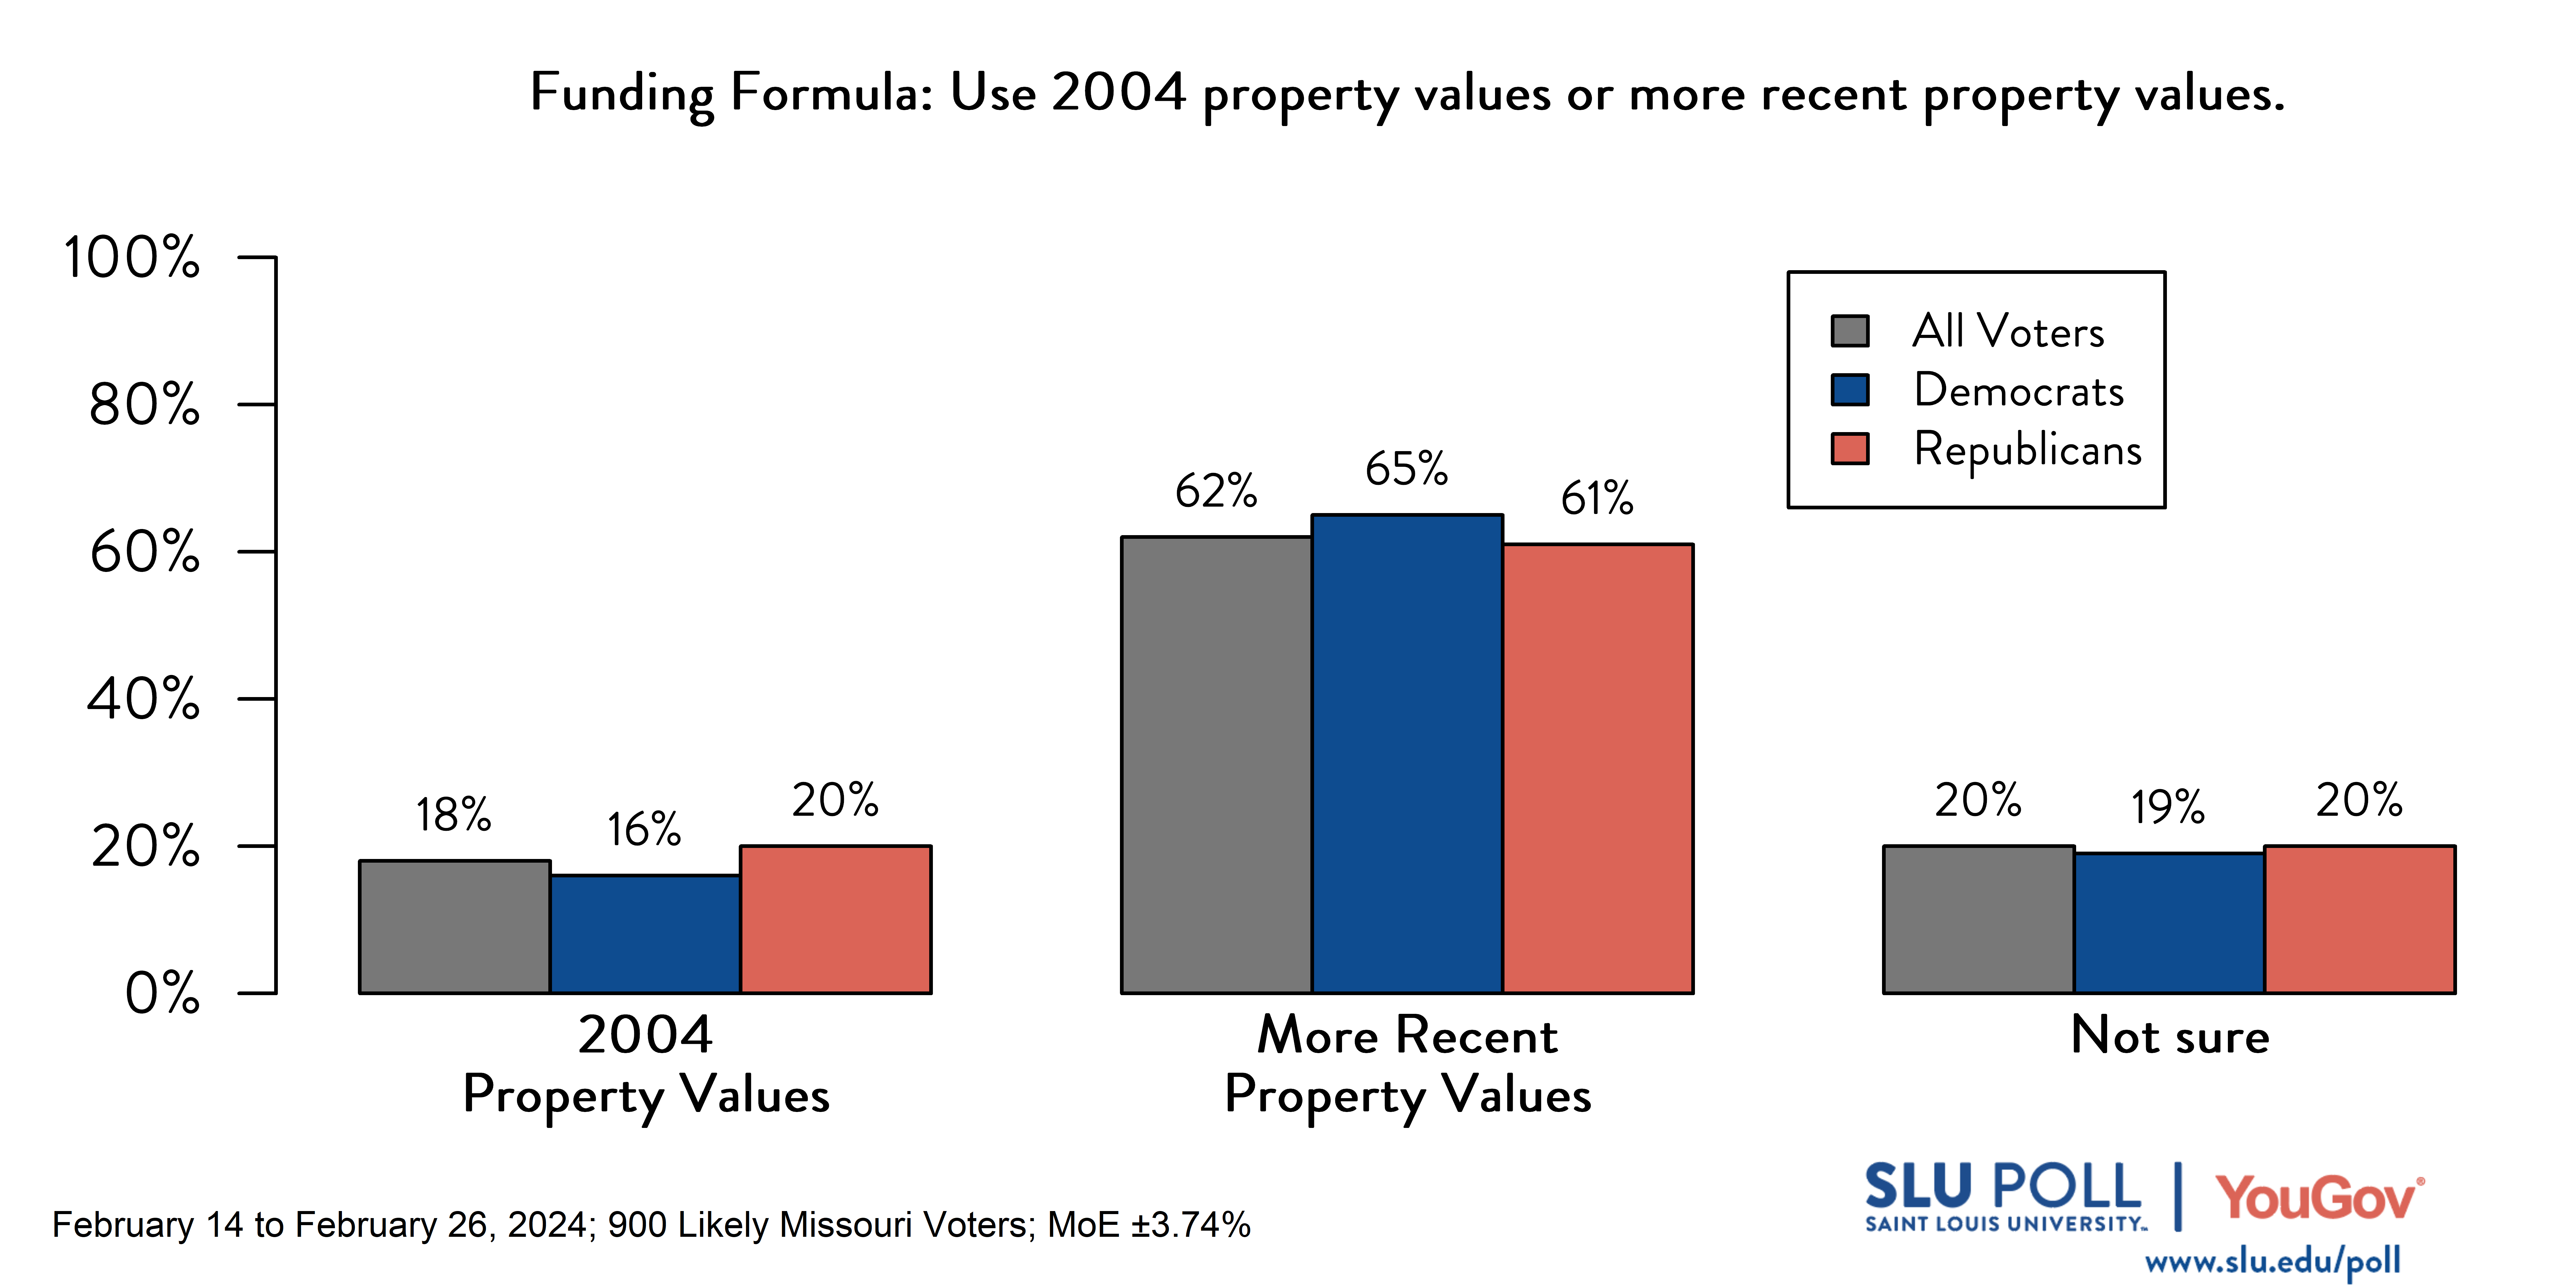 Likely voters' responses to 'Should the school funding formula use 2004 property values or more recent property values (such as those within the last 5 years) when making these estimates?': 18% The formula should use 2004 property values., 62% The formula should use more recent property values., and 20% Not sure. Democratic voters' responses: ' 16% The formula should use 2004 property values., 65% The formula should use more recent property values., and 19% Not sure. Republican voters' responses:  20% The formula should use 2004 property values., 61% The formula should use more recent property values., and 20% Not sure.